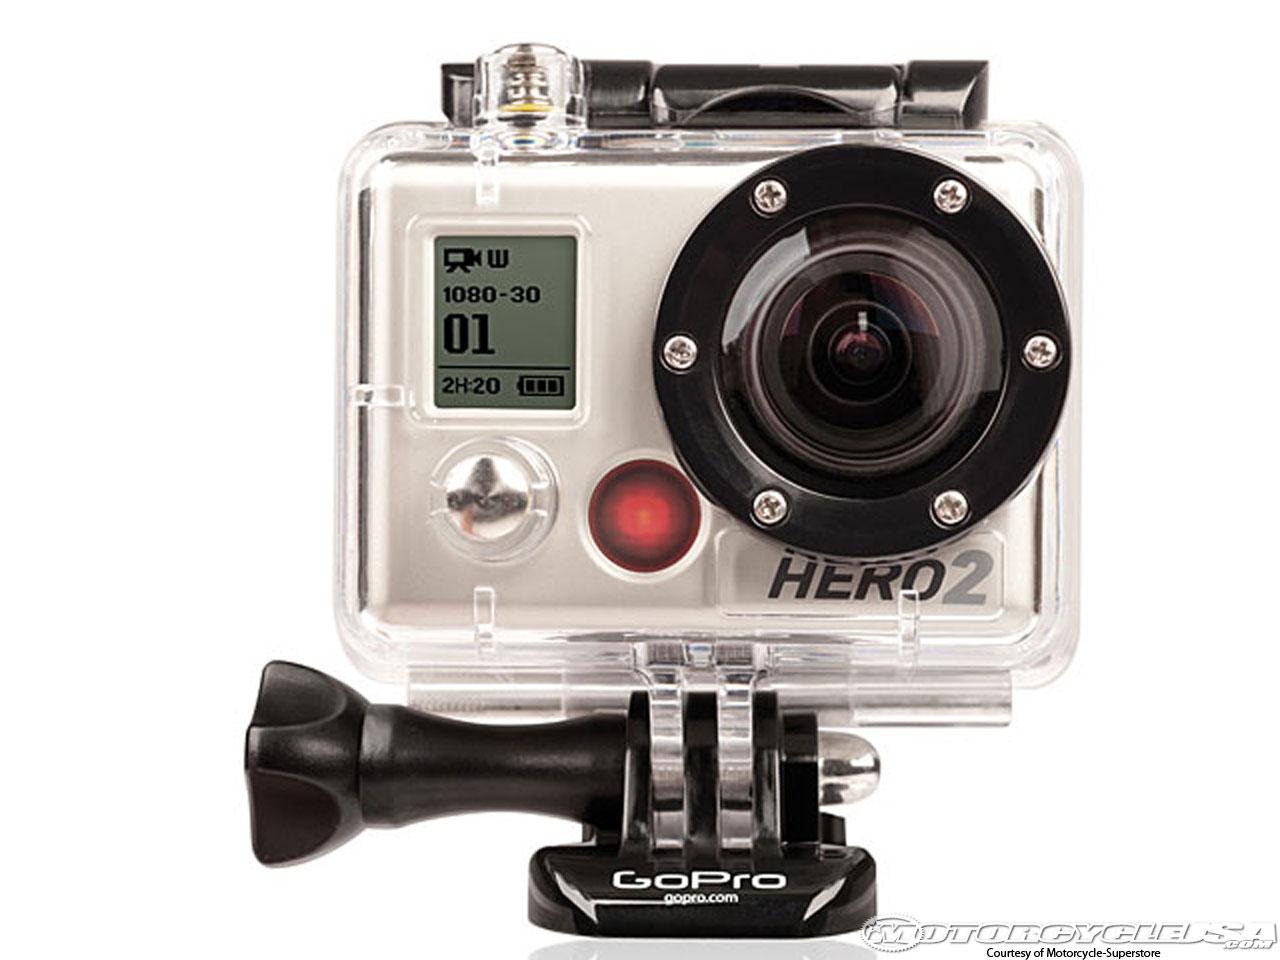 More information about "GoPro 2"